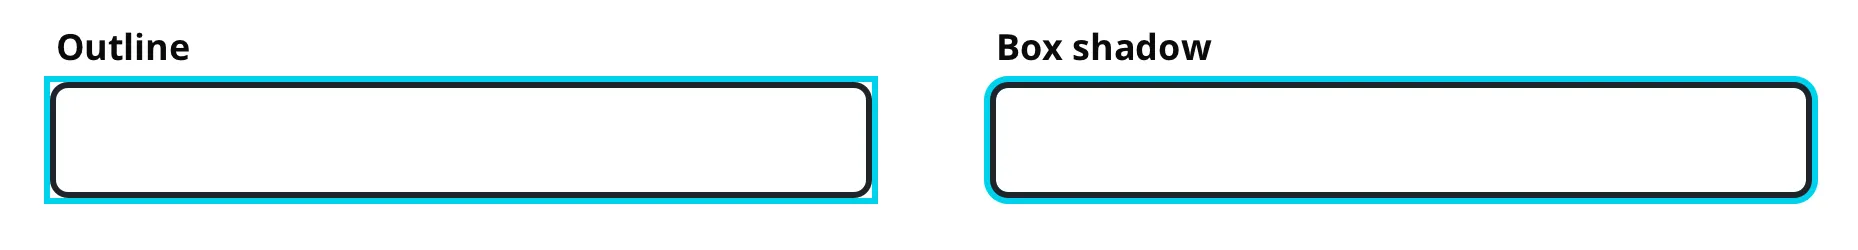 Demonstrating outline vs box-shadow. Showing that outline does not hug rounded corners, whilst the box shadow does